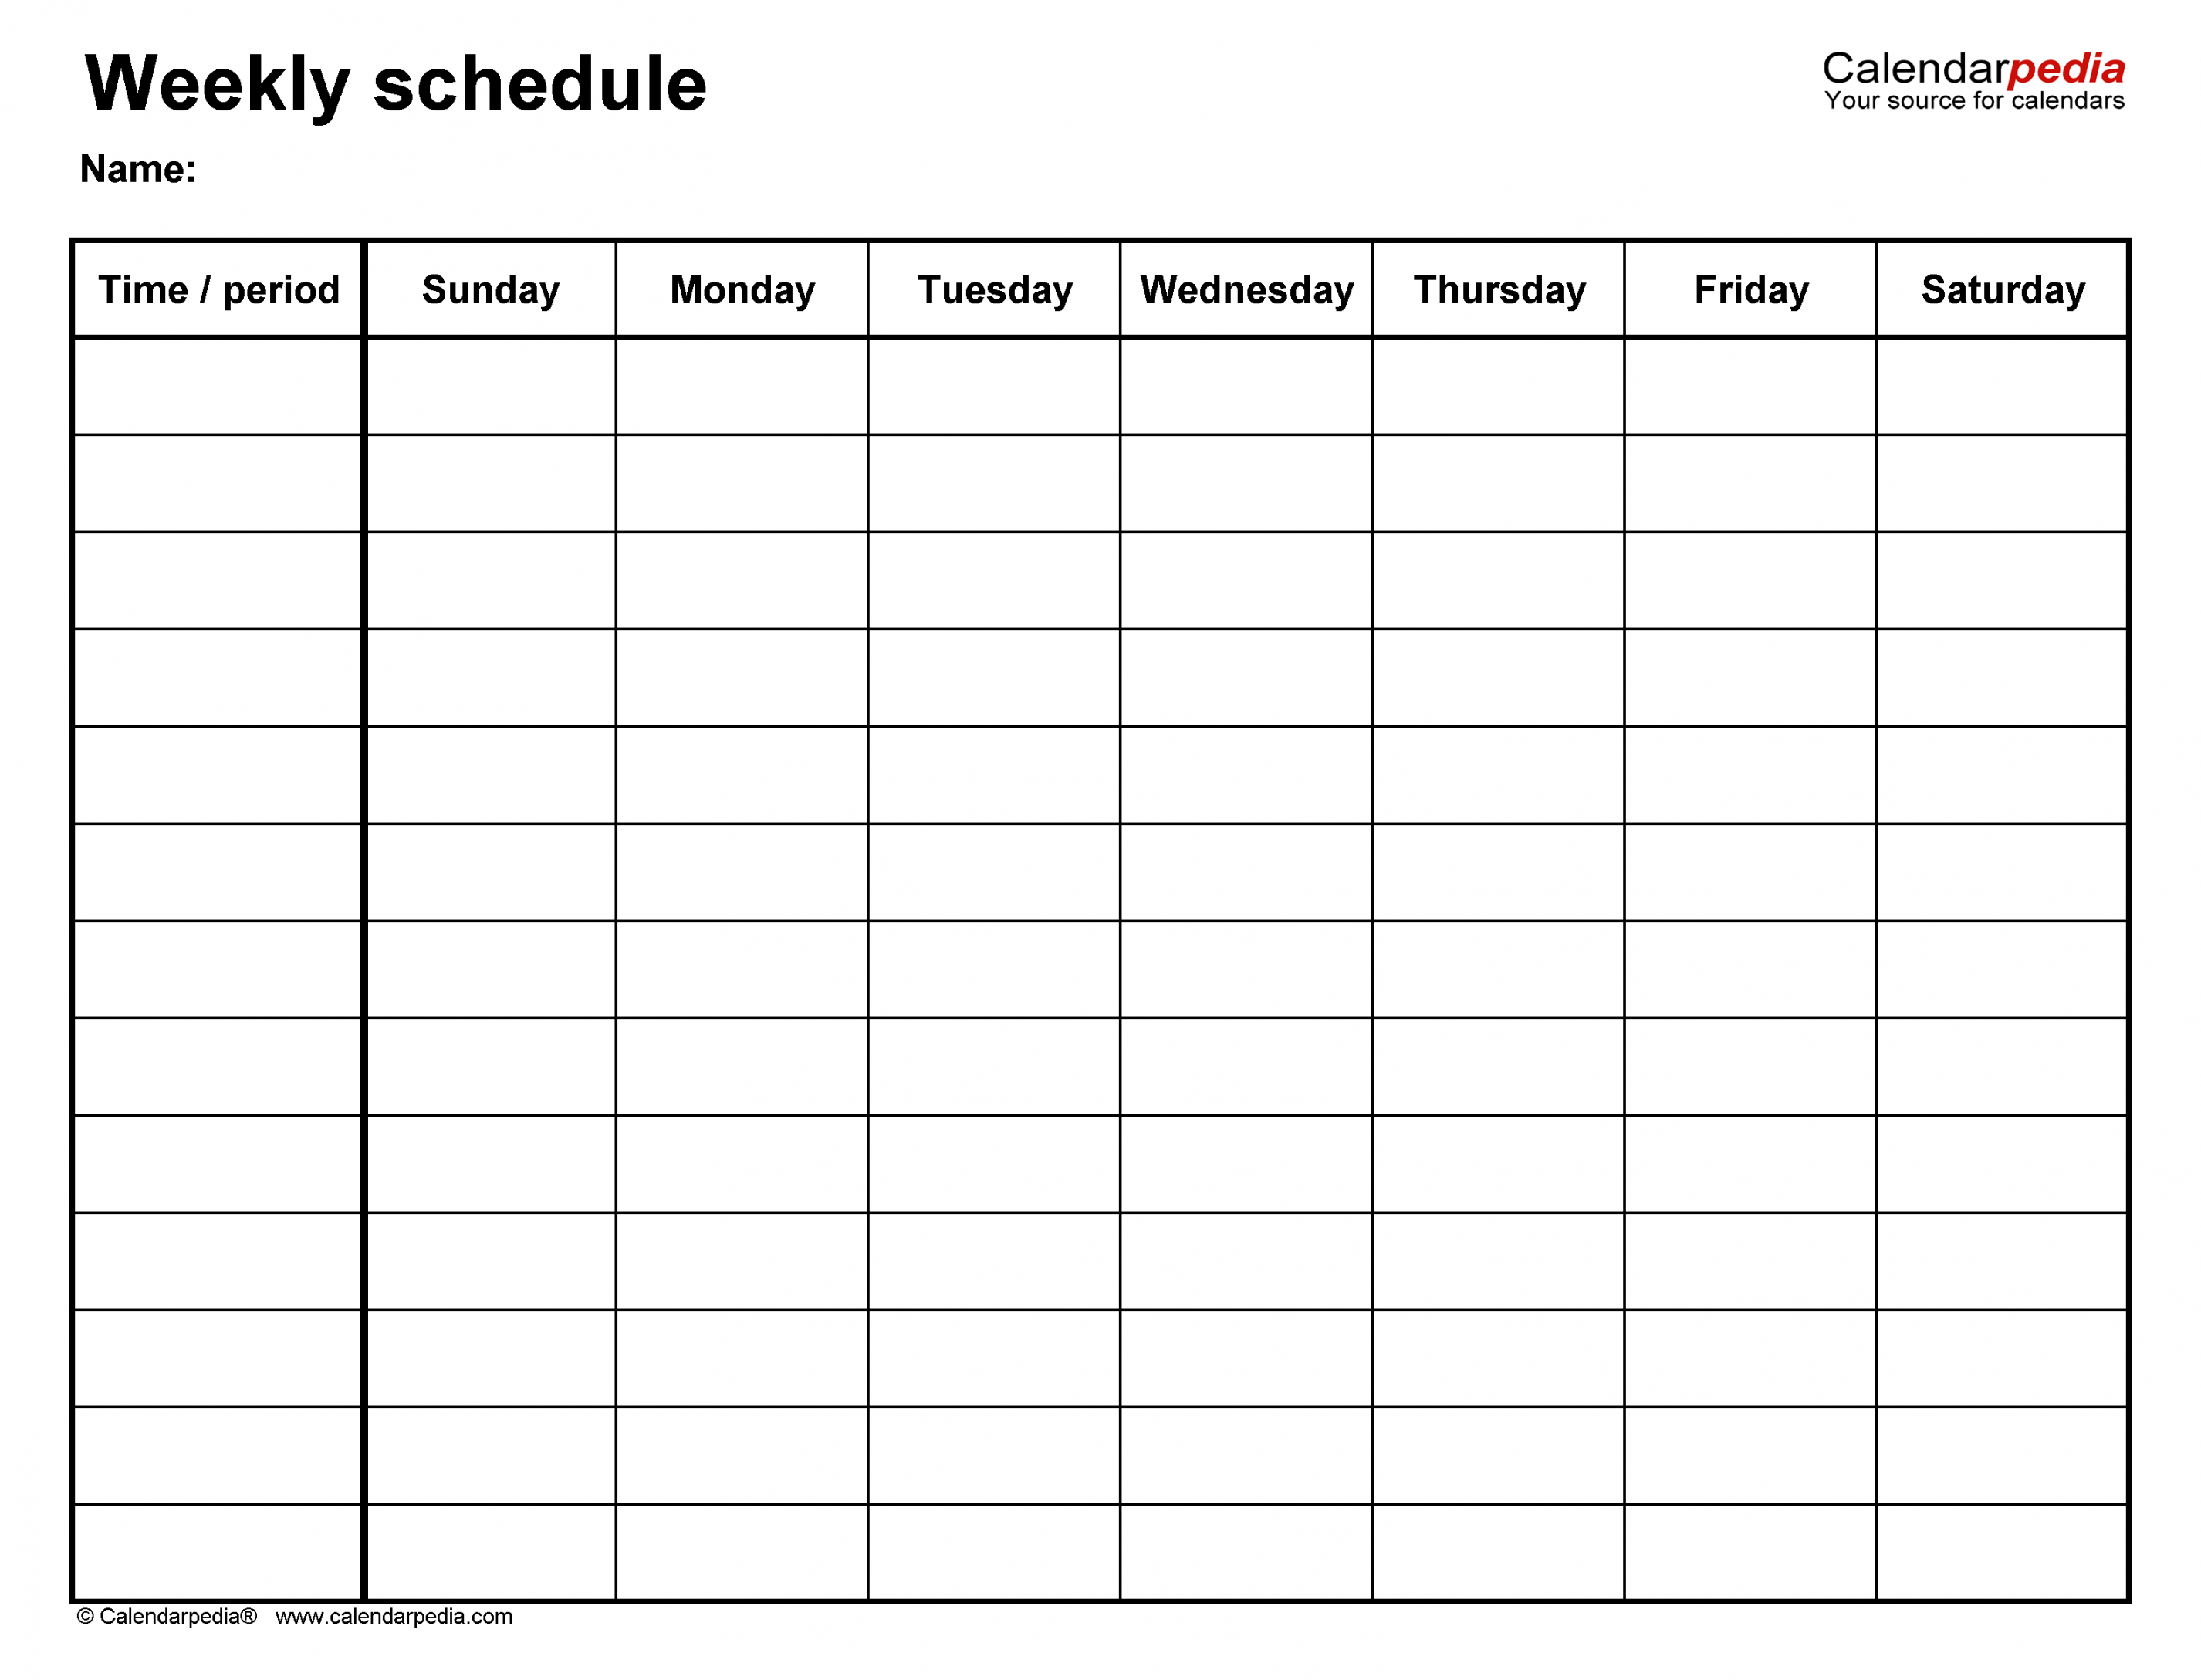 Free Weekly Schedules for PDF -  Templates